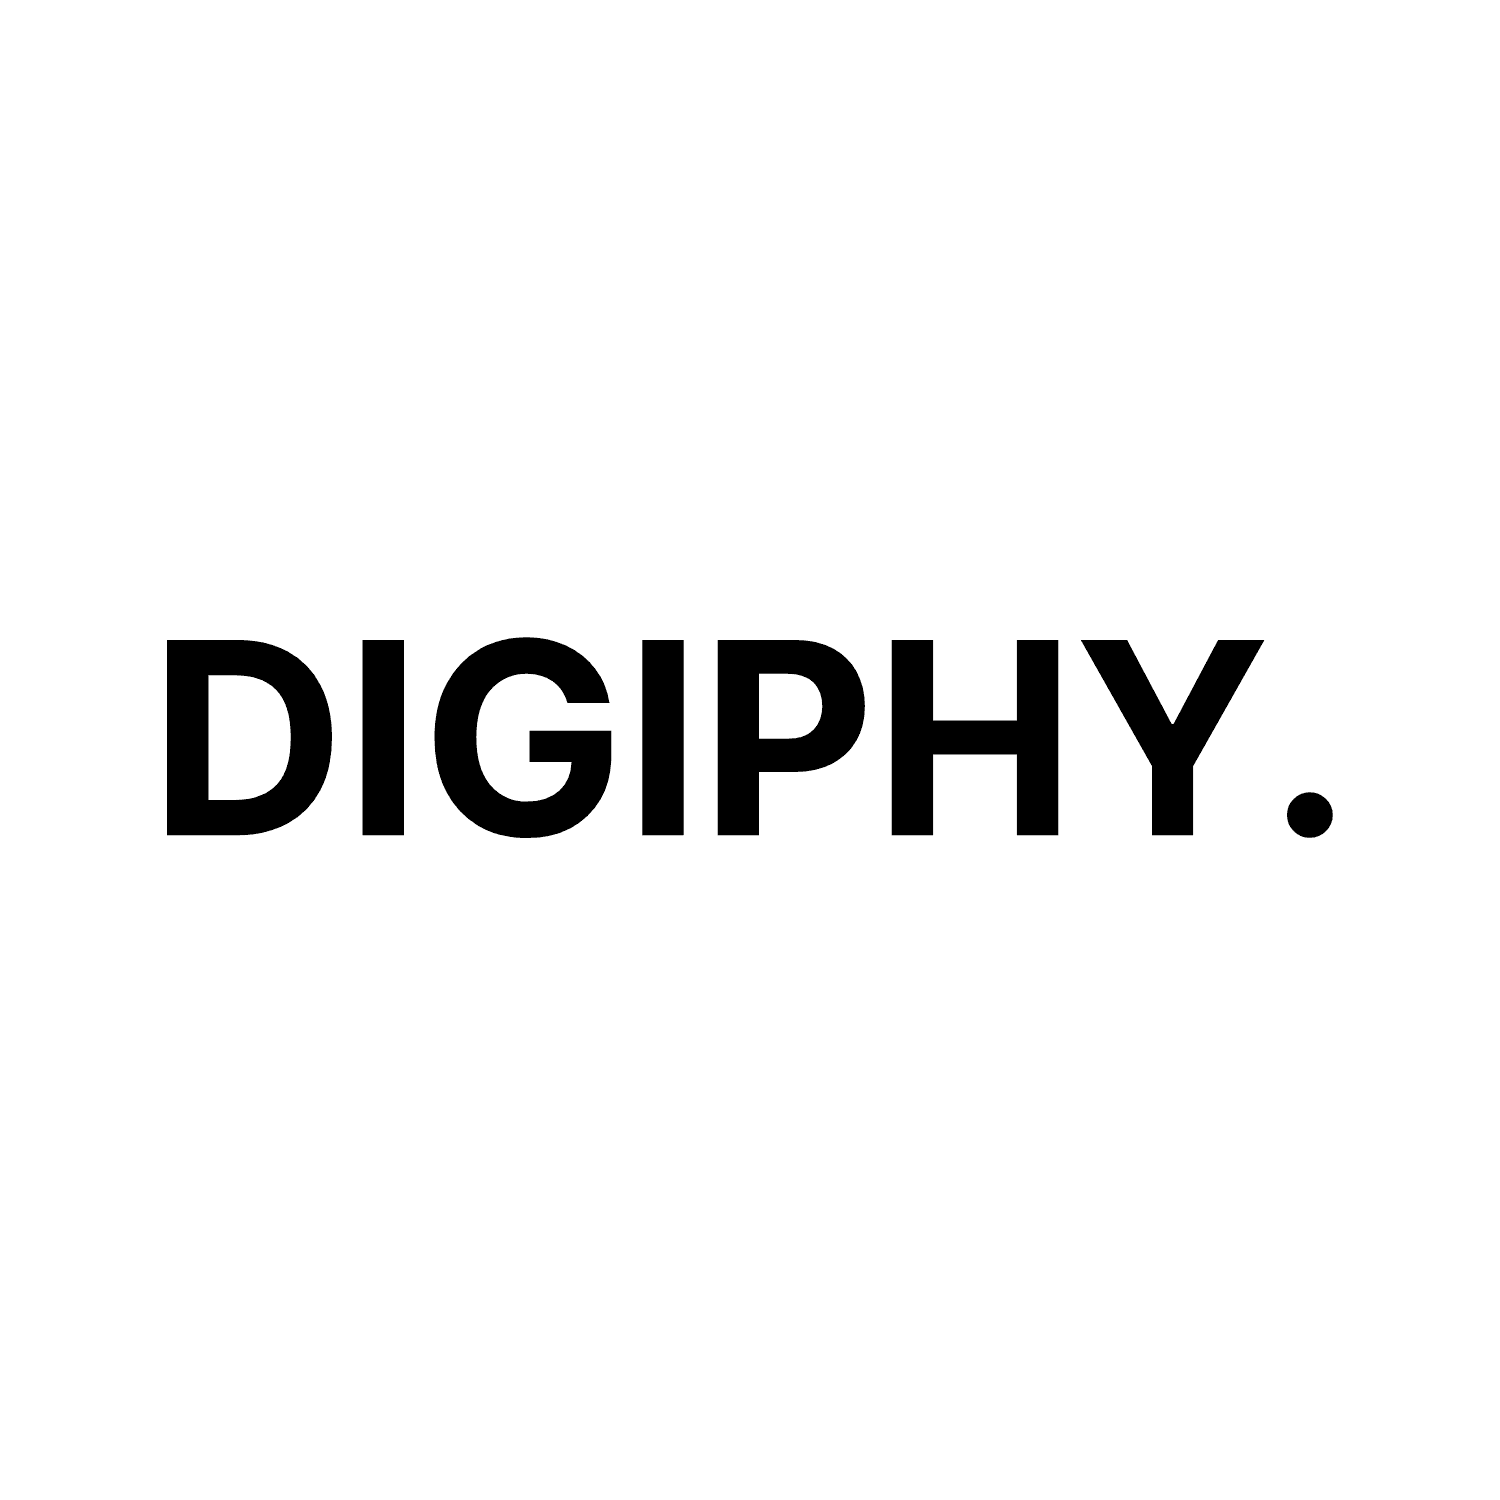 OfficialDigiphy